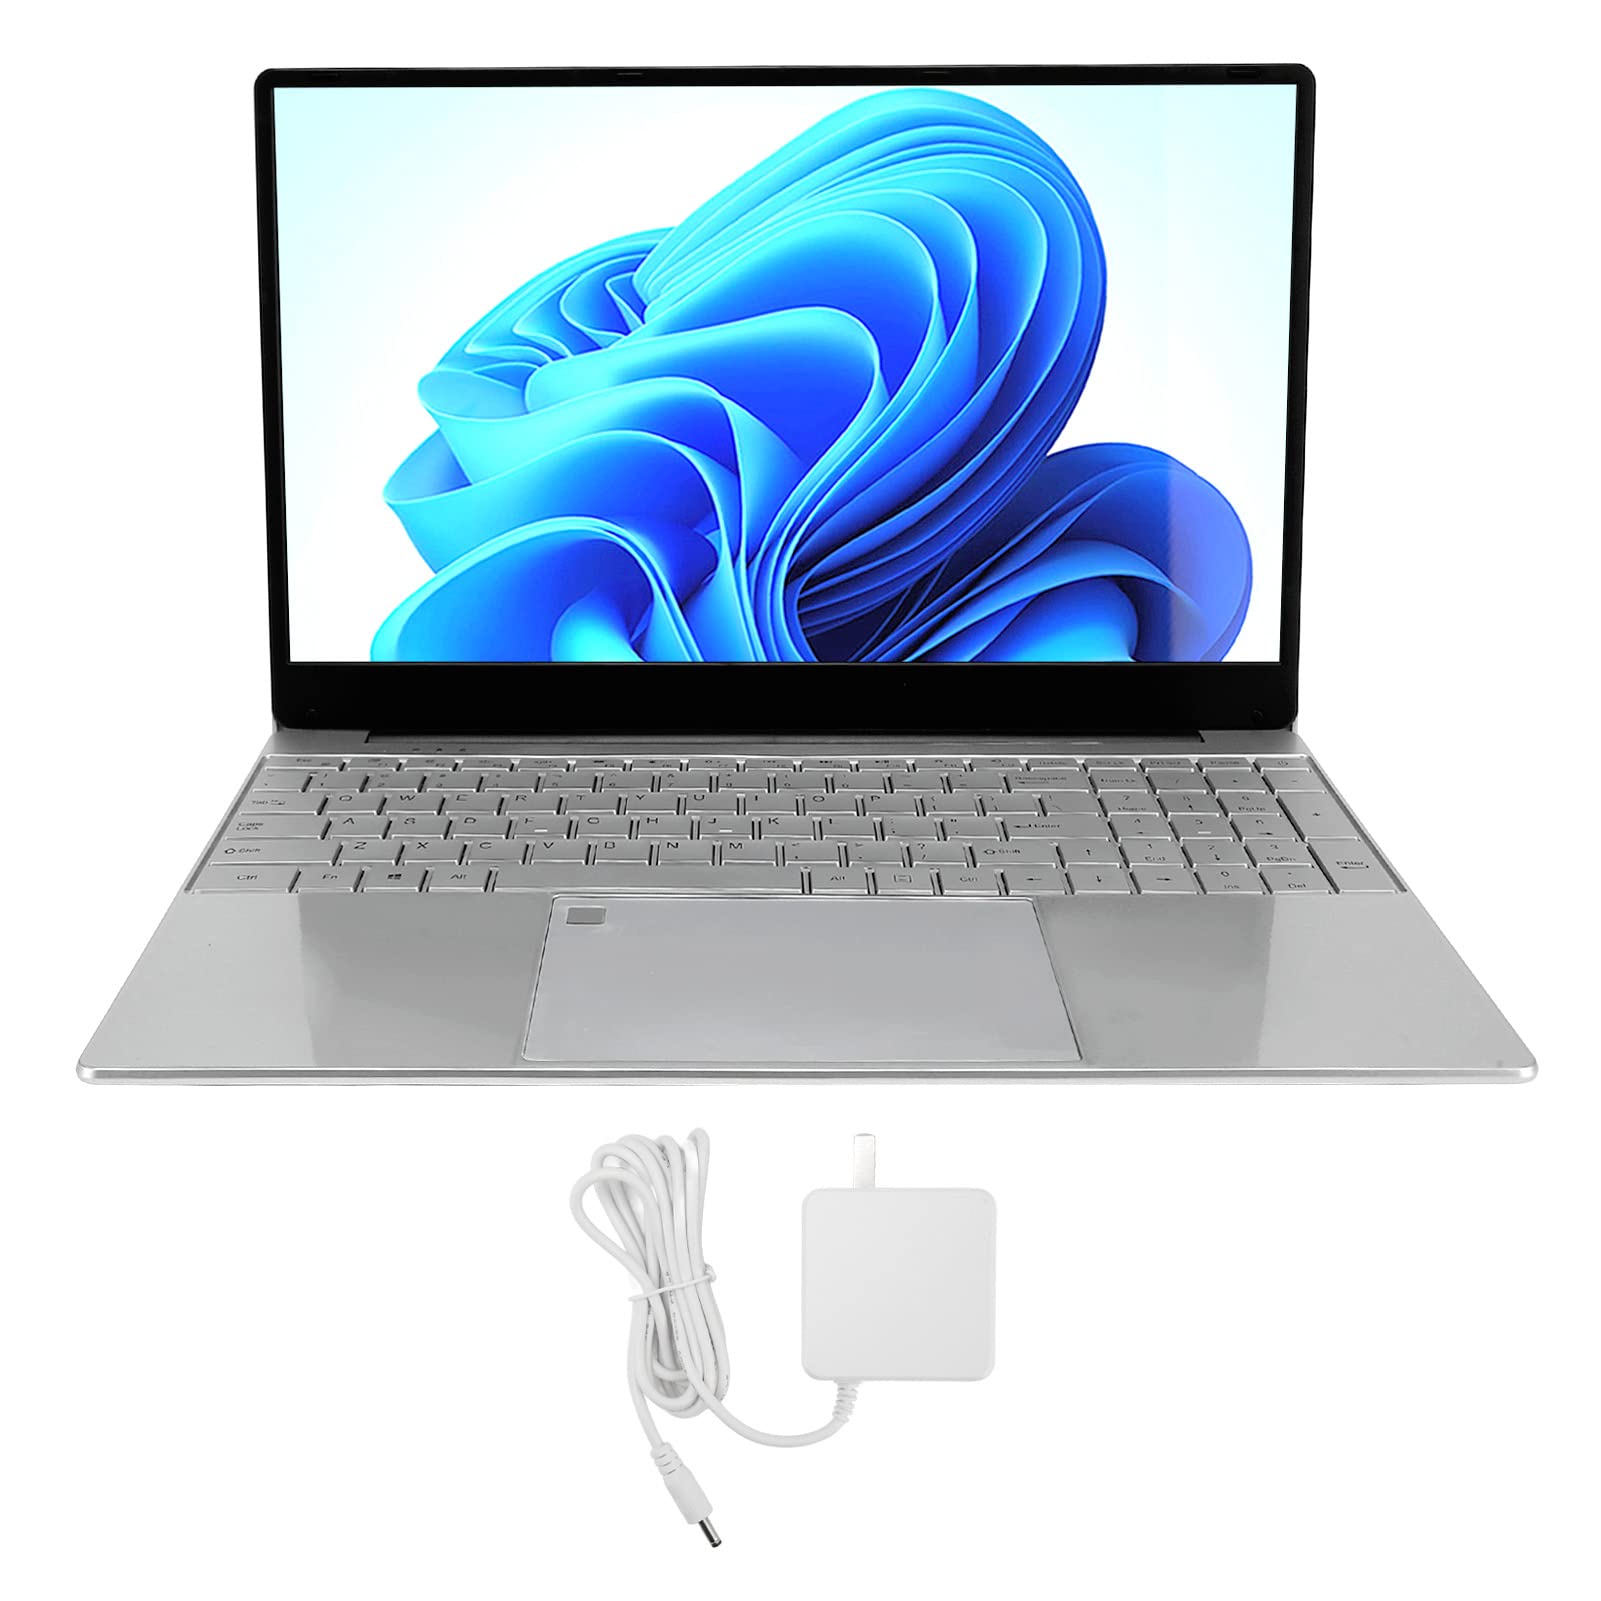 Jectse 15.6in Laptop, 12GB RAM 512GB ROM, Quad Core for Intel N5105 CPU Notebook Computer with Fingerprint Reader and Keypad, 2K HD IPS Screen, 7000mAh Battery for Windows 10, Silver